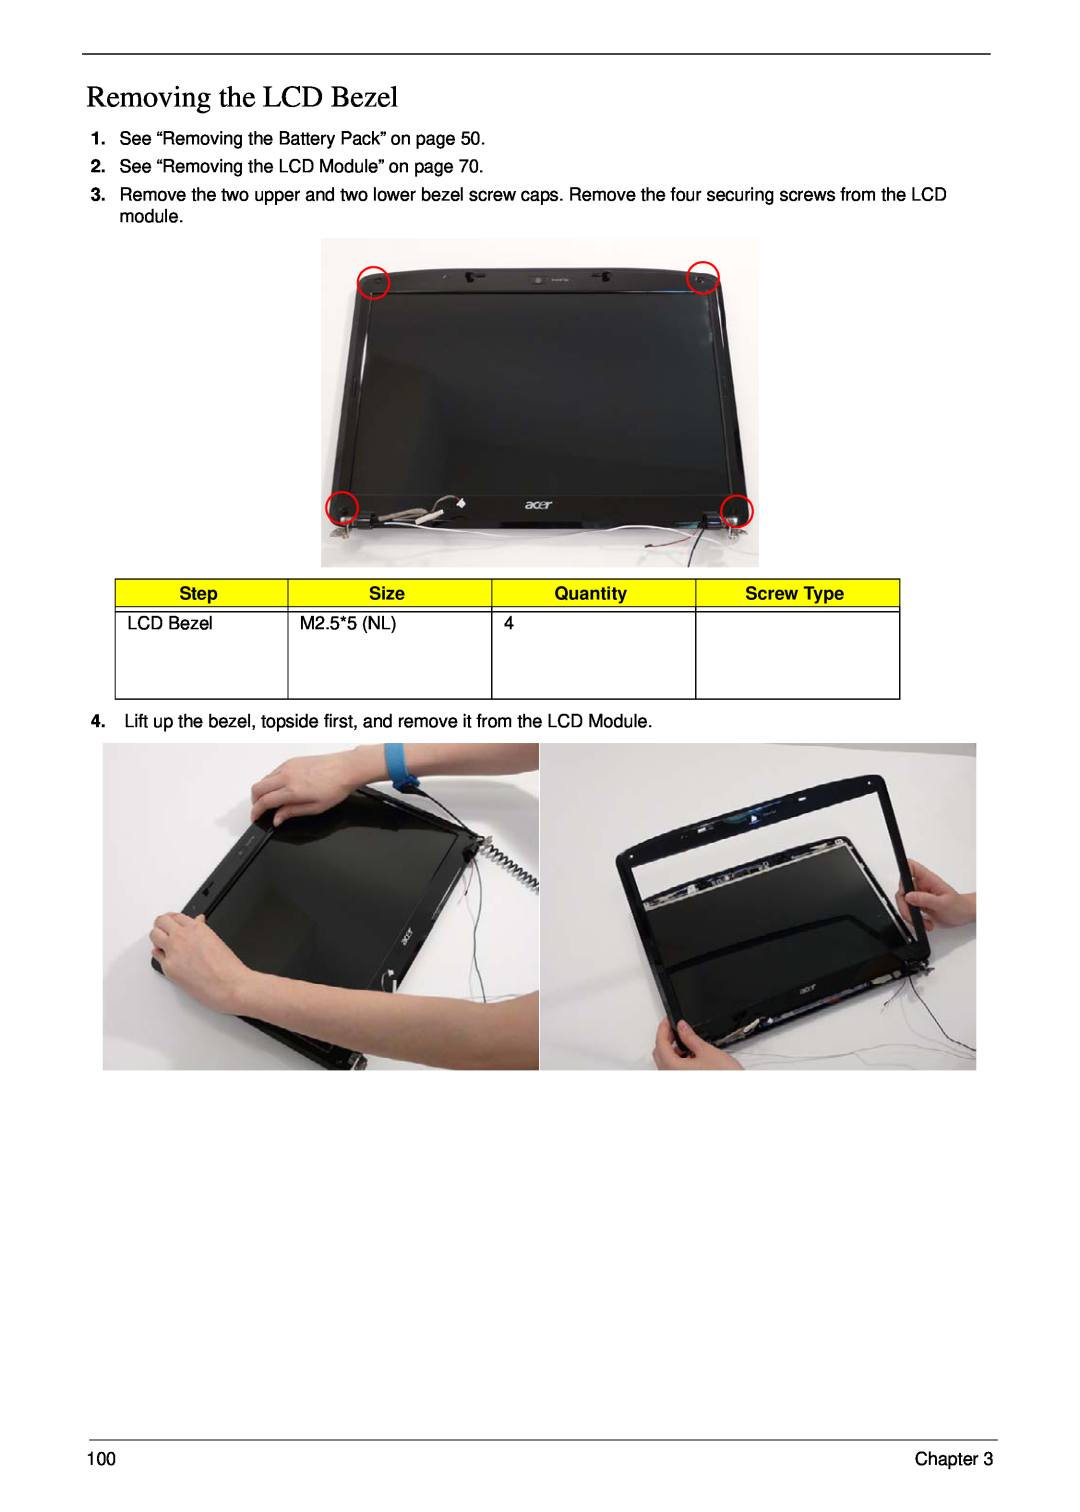 Acer 5530G manual Removing the LCD Bezel, Step, Size, Quantity, Screw Type, M2.5*5 NL 